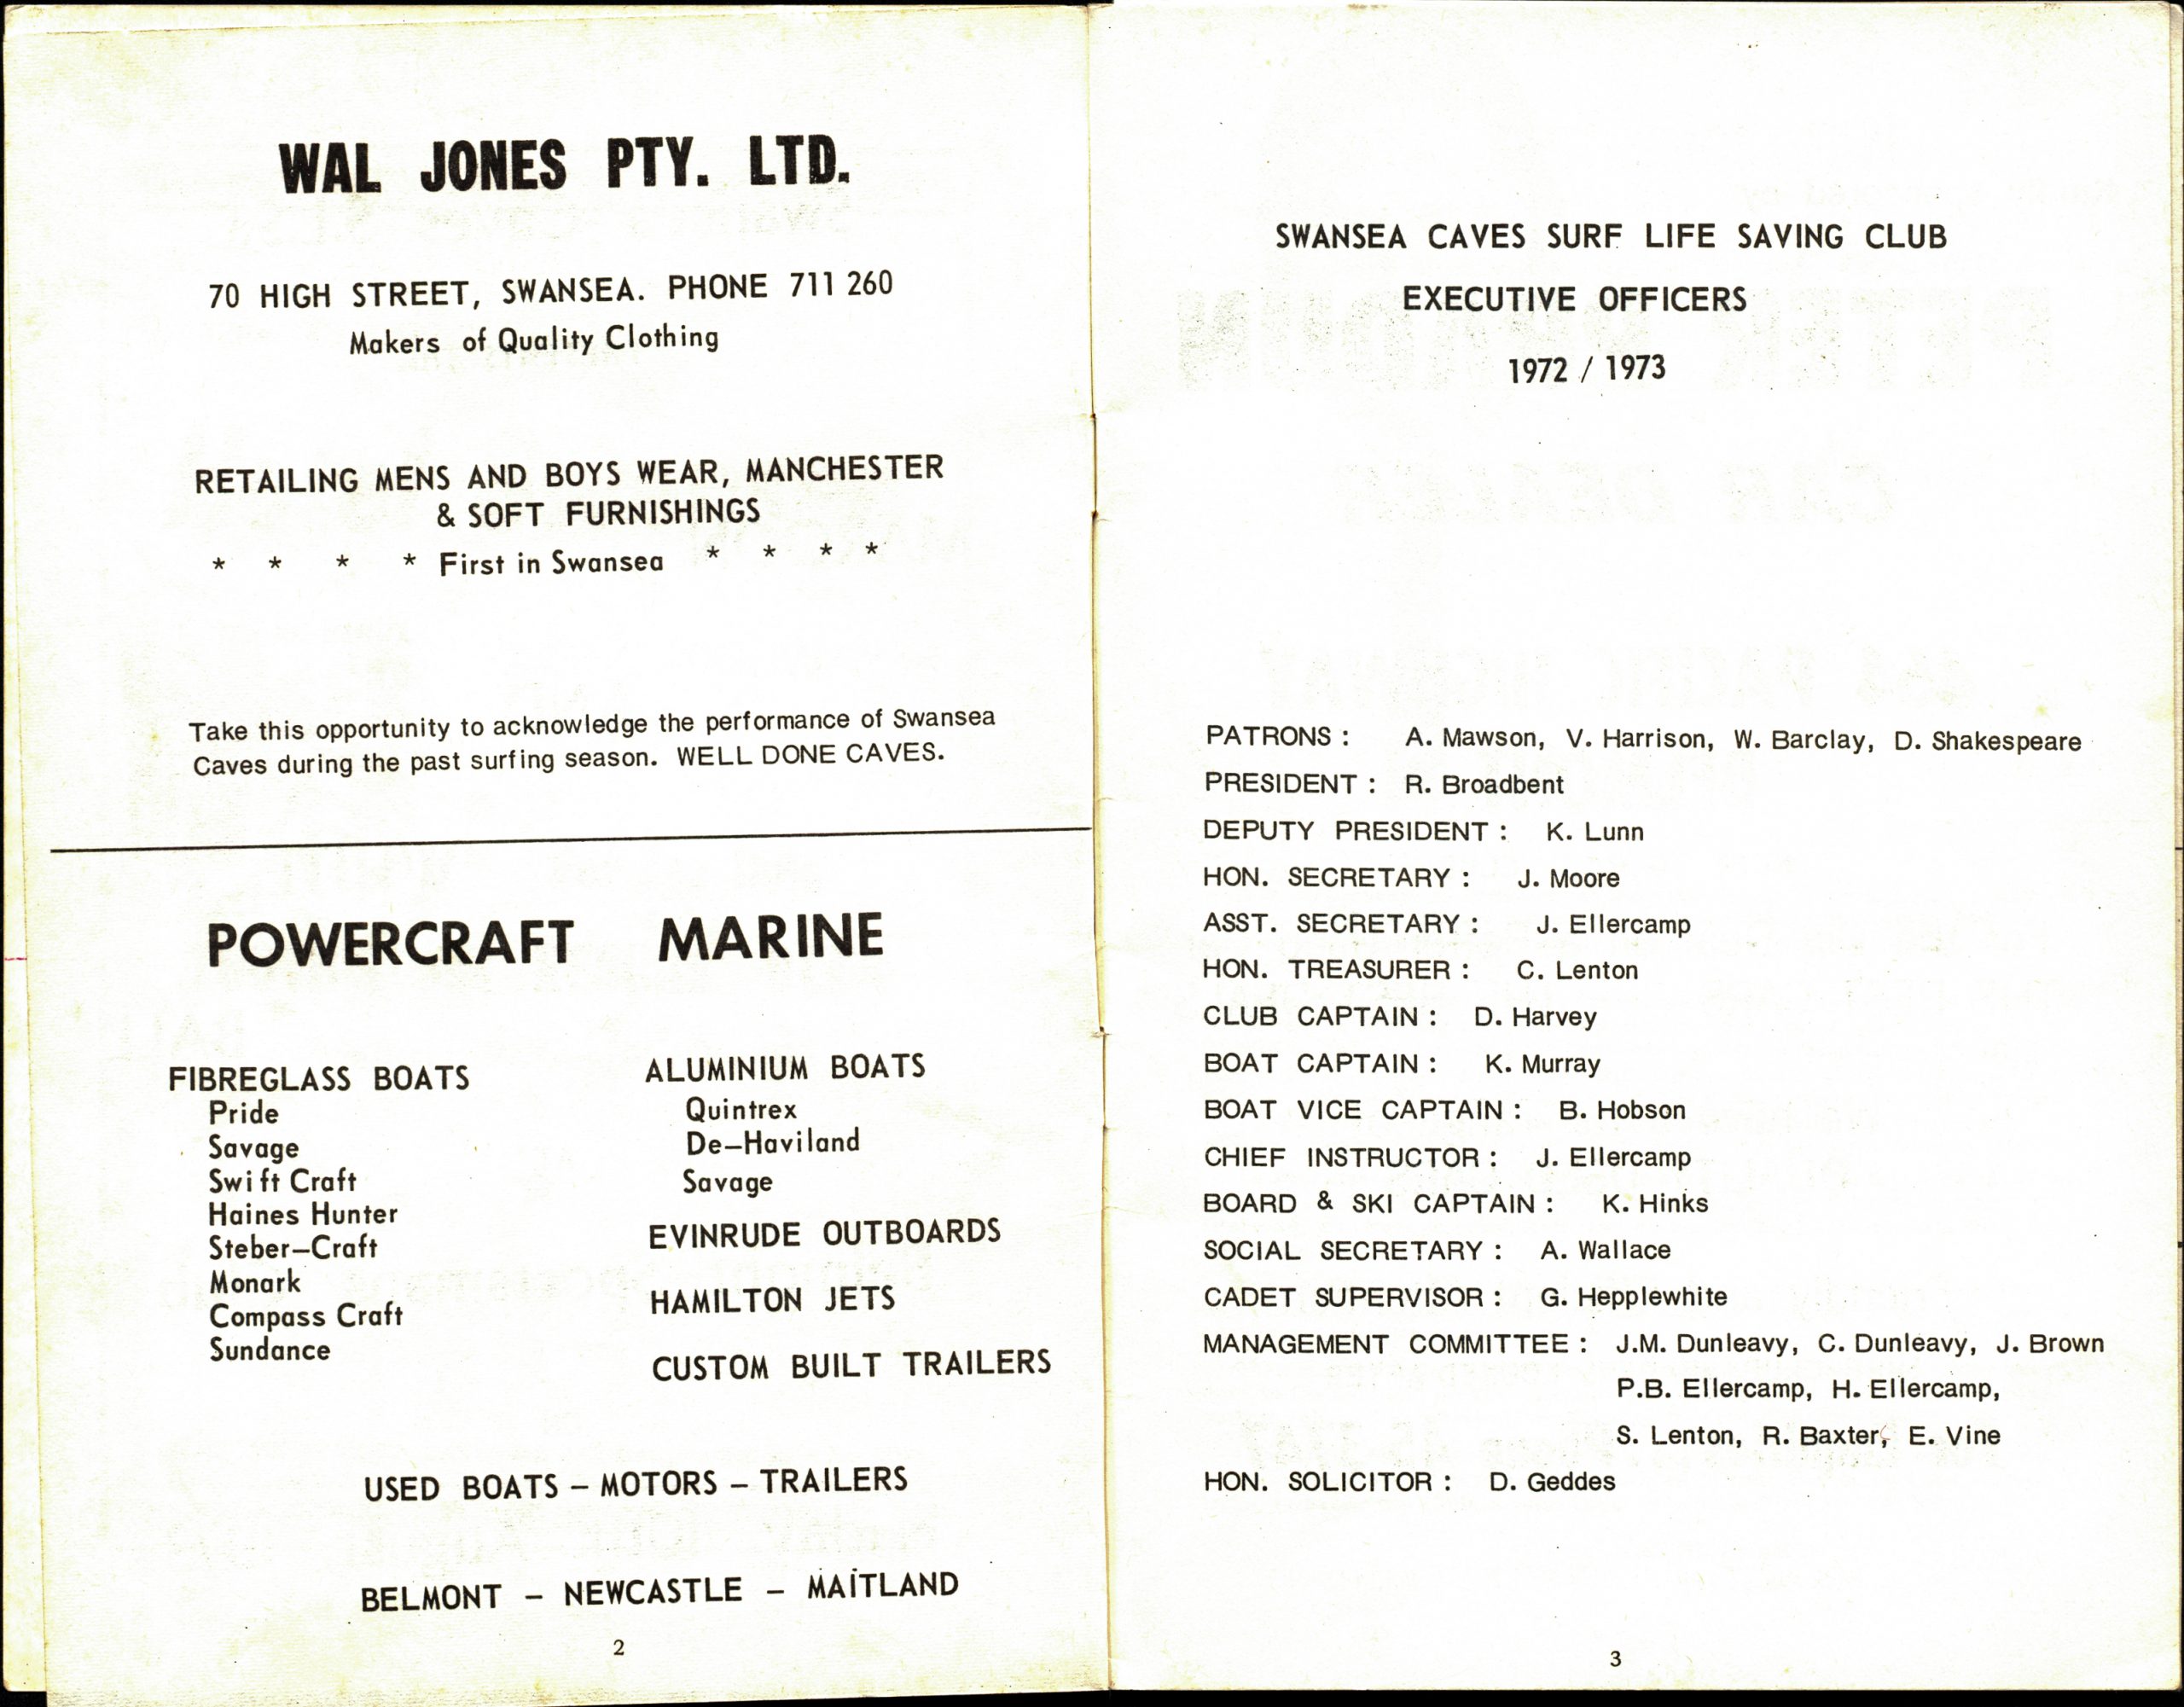 Programme pages with local advertisements followed by a list of the Swansea Caves Surf Life Saving Club committee.